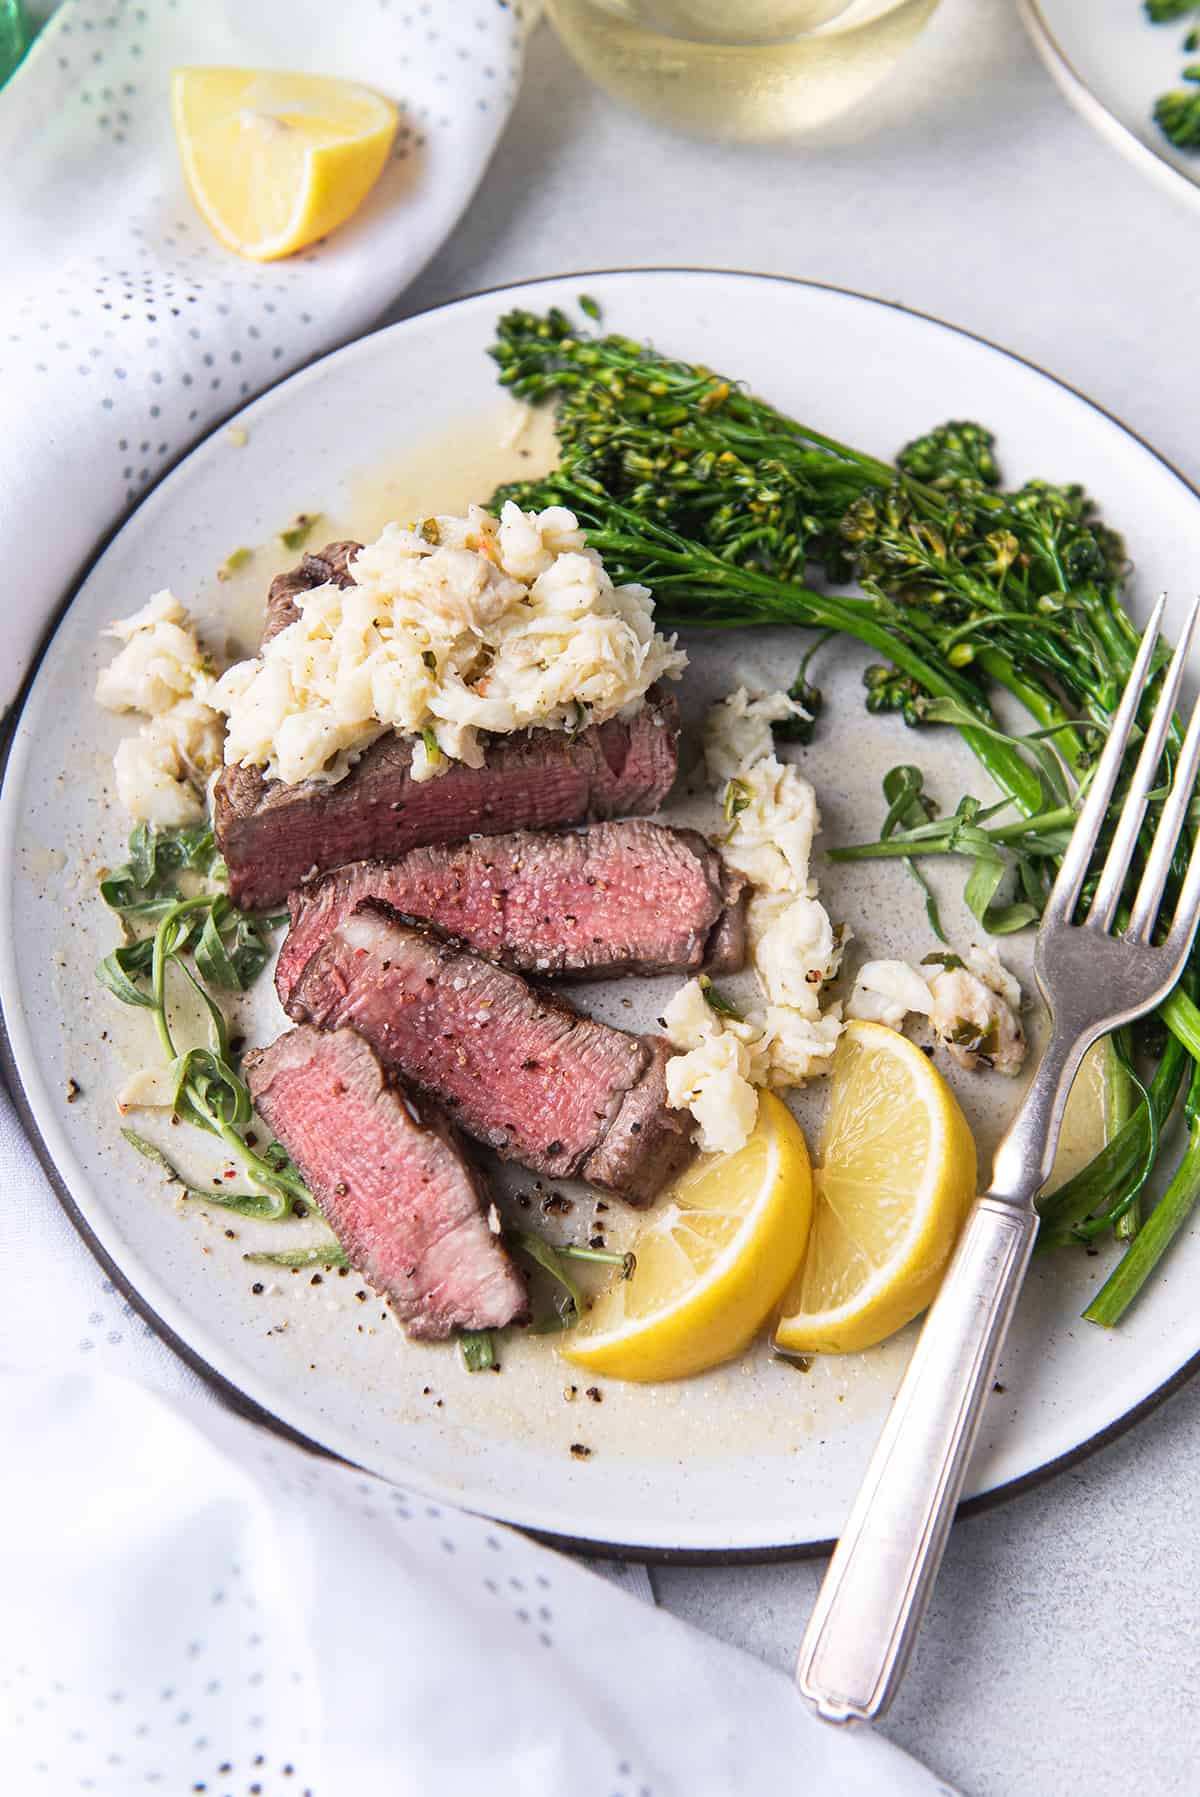 grilled filet slices on white plate, topped with crab meat + broccolini and fork